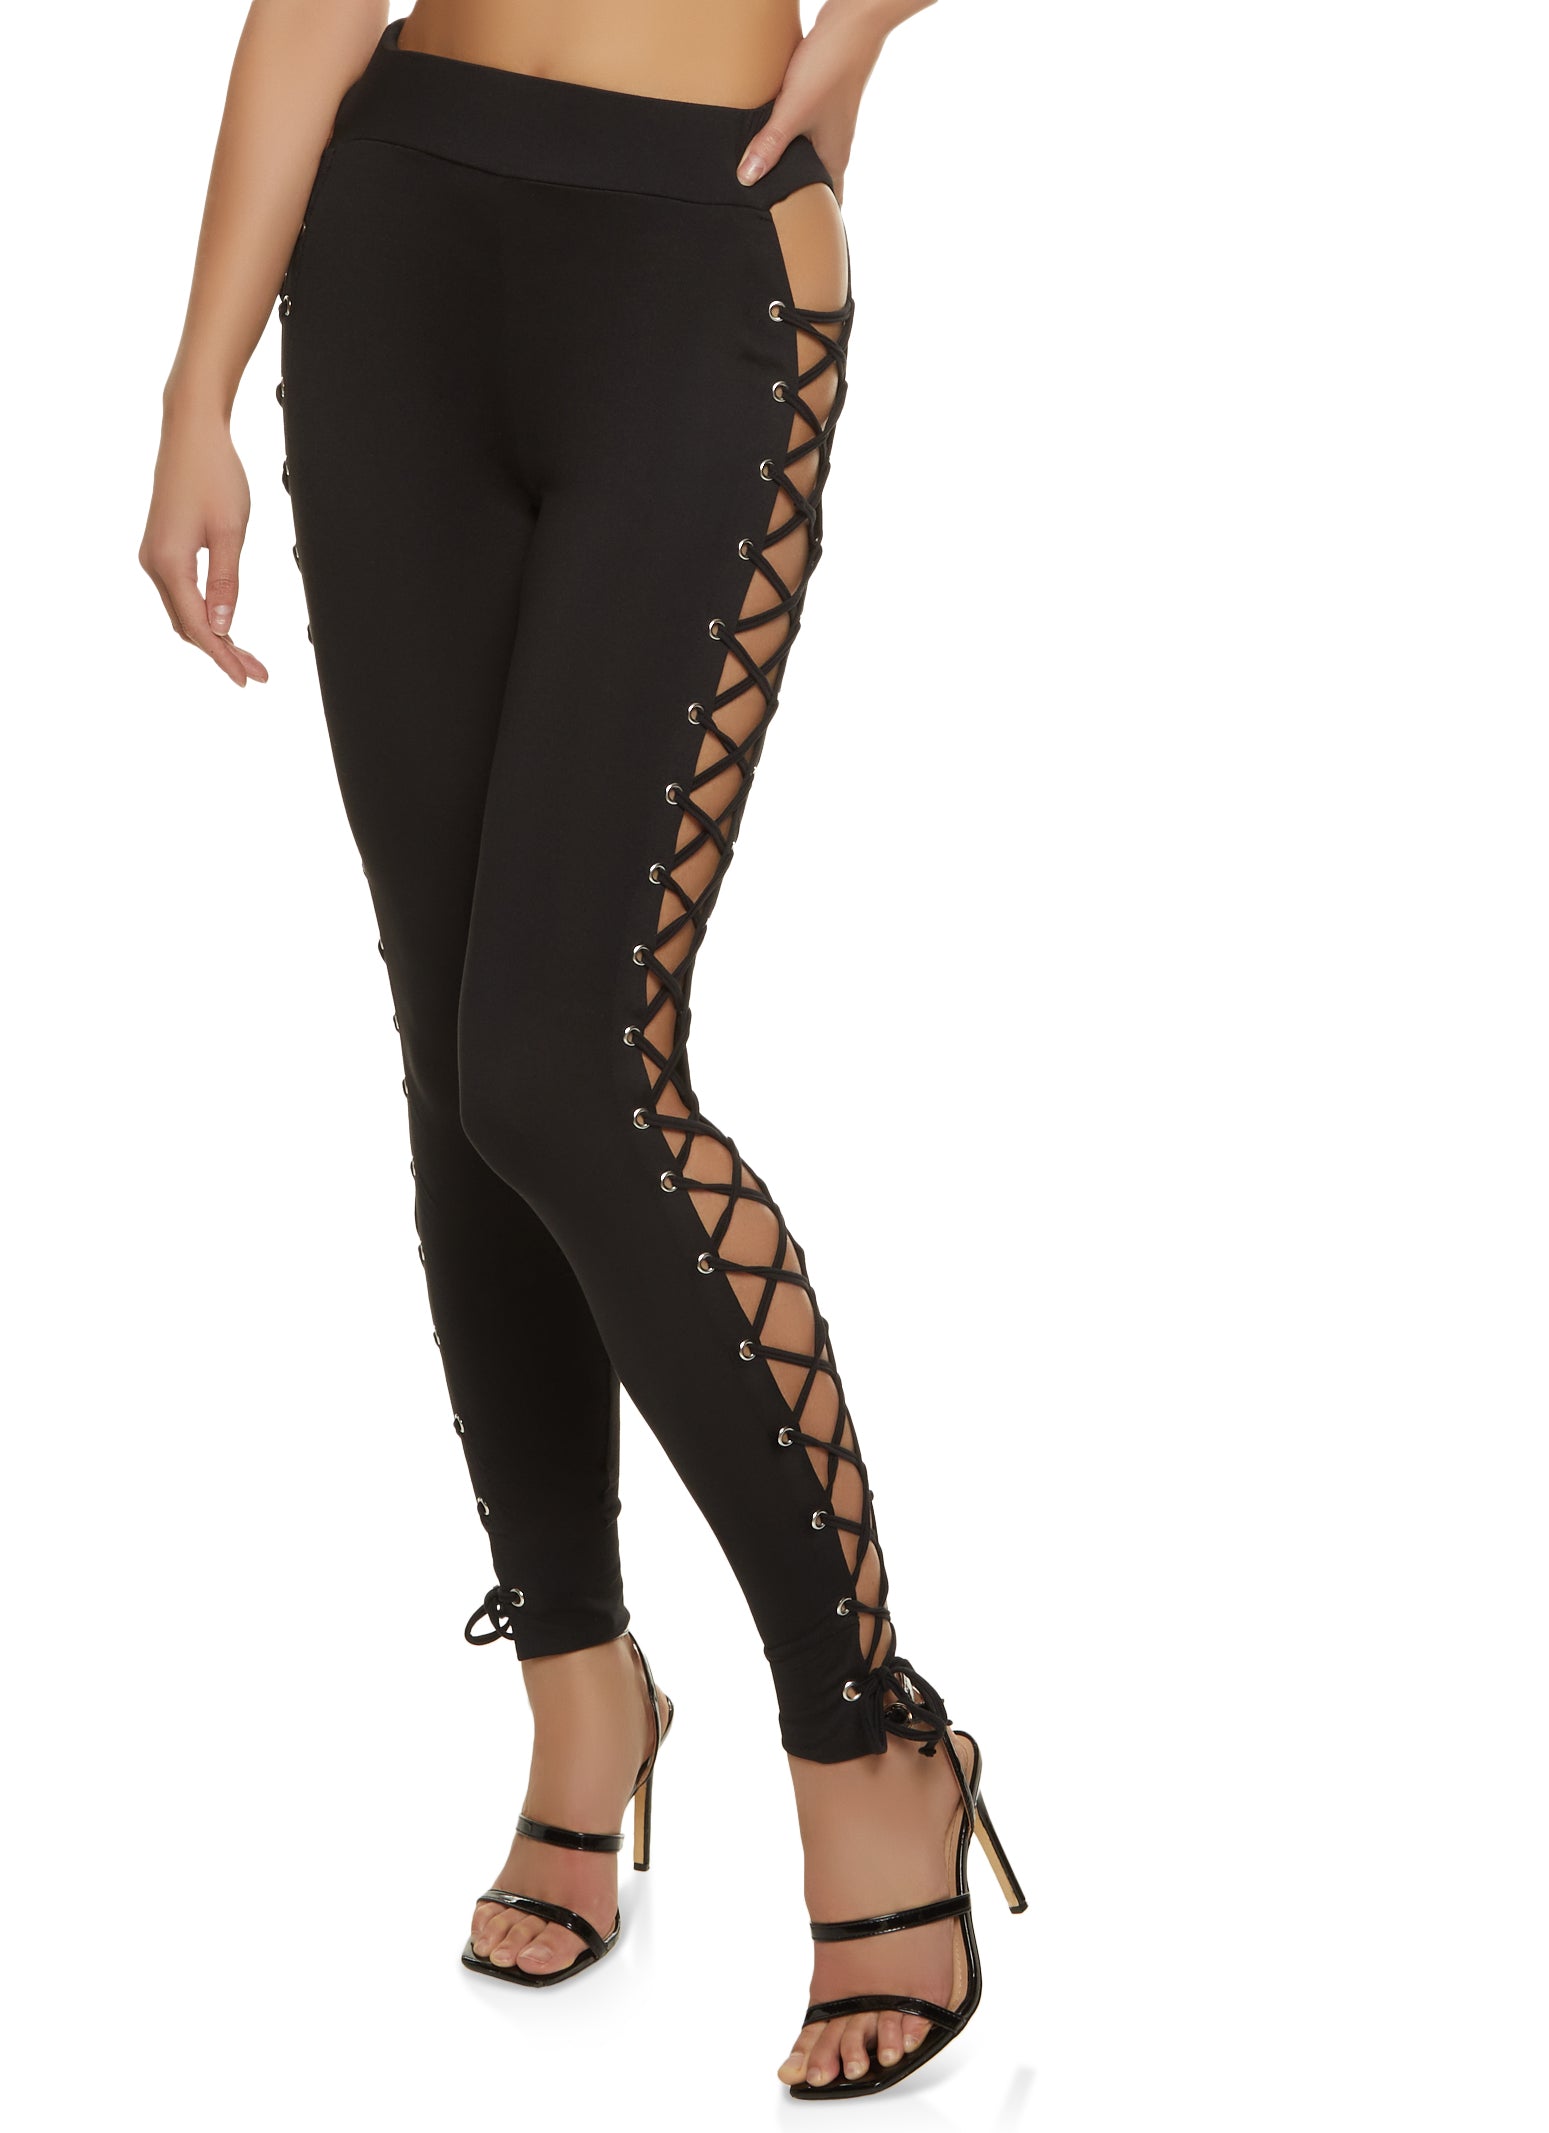 Lace Up Side High Waist Leggings